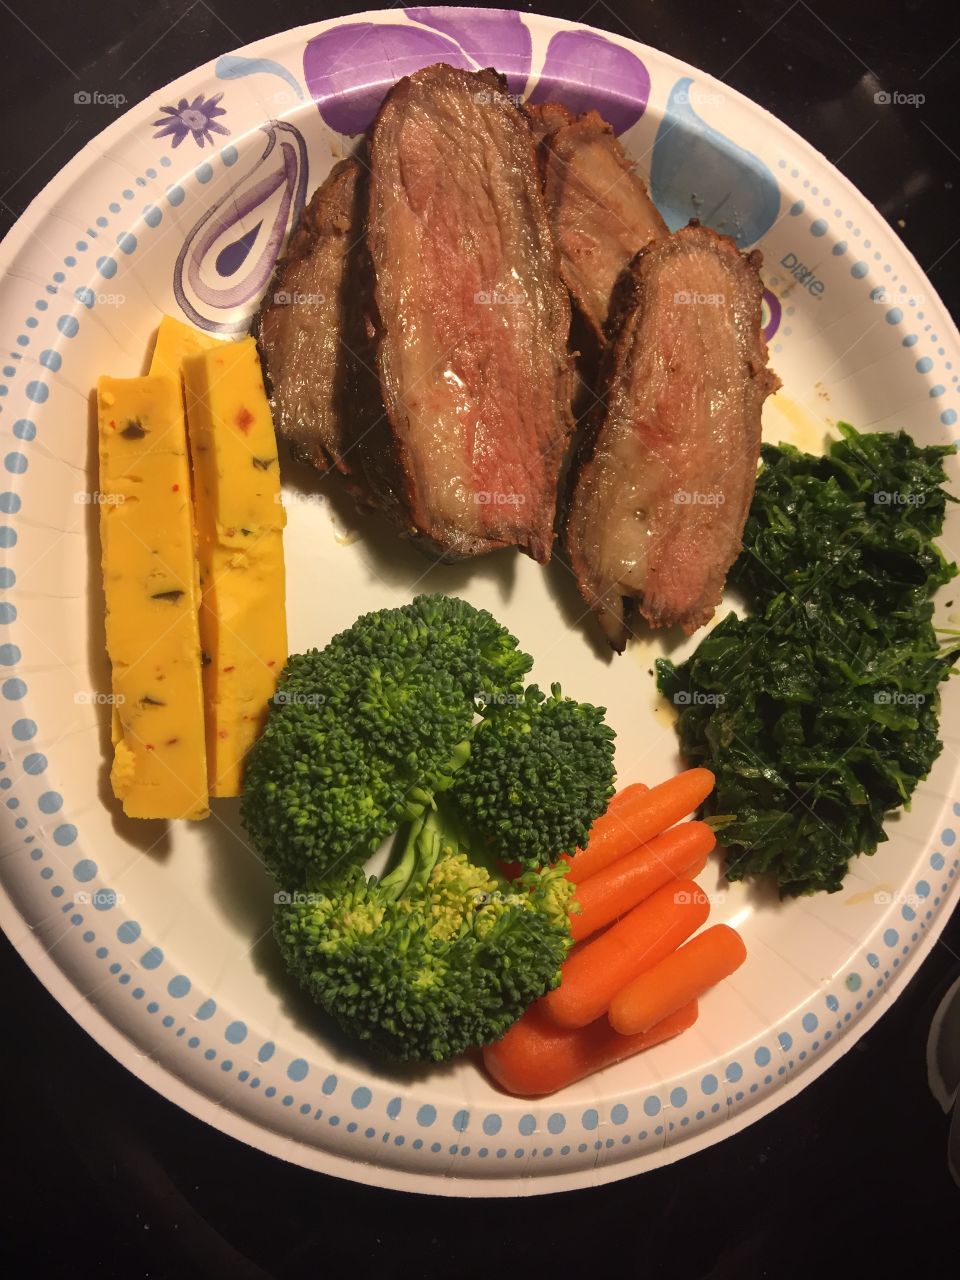 Meat and vegetables 